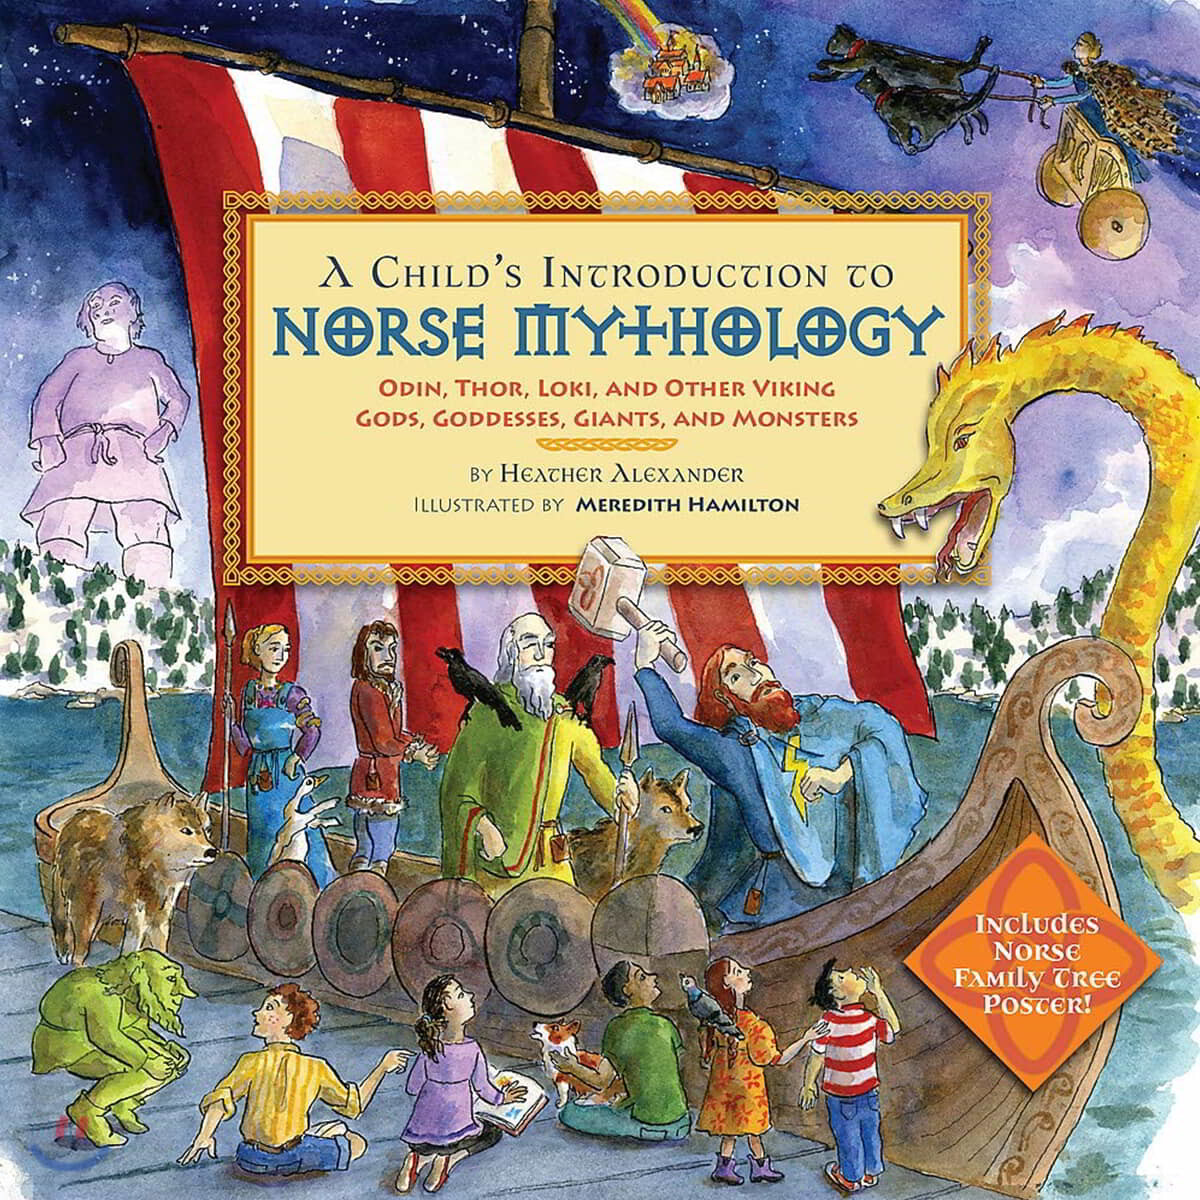 A Child's Introduction to Norse Mythology: Odin, Thor, Loki, and Other Viking Gods, Goddesses, Giants, and Monsters